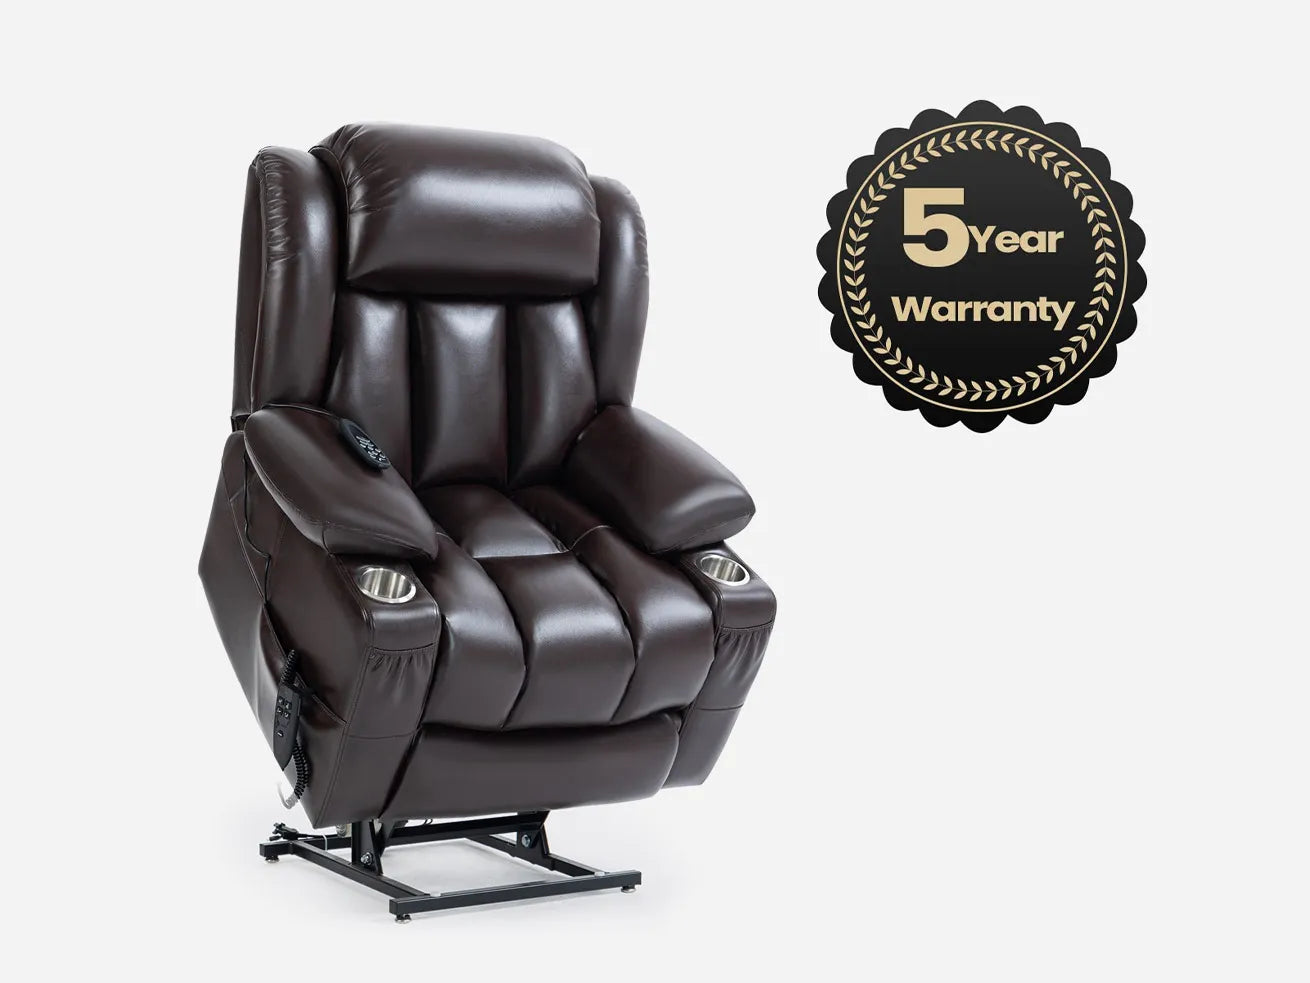 luxury lift recliner with 5 year warranty